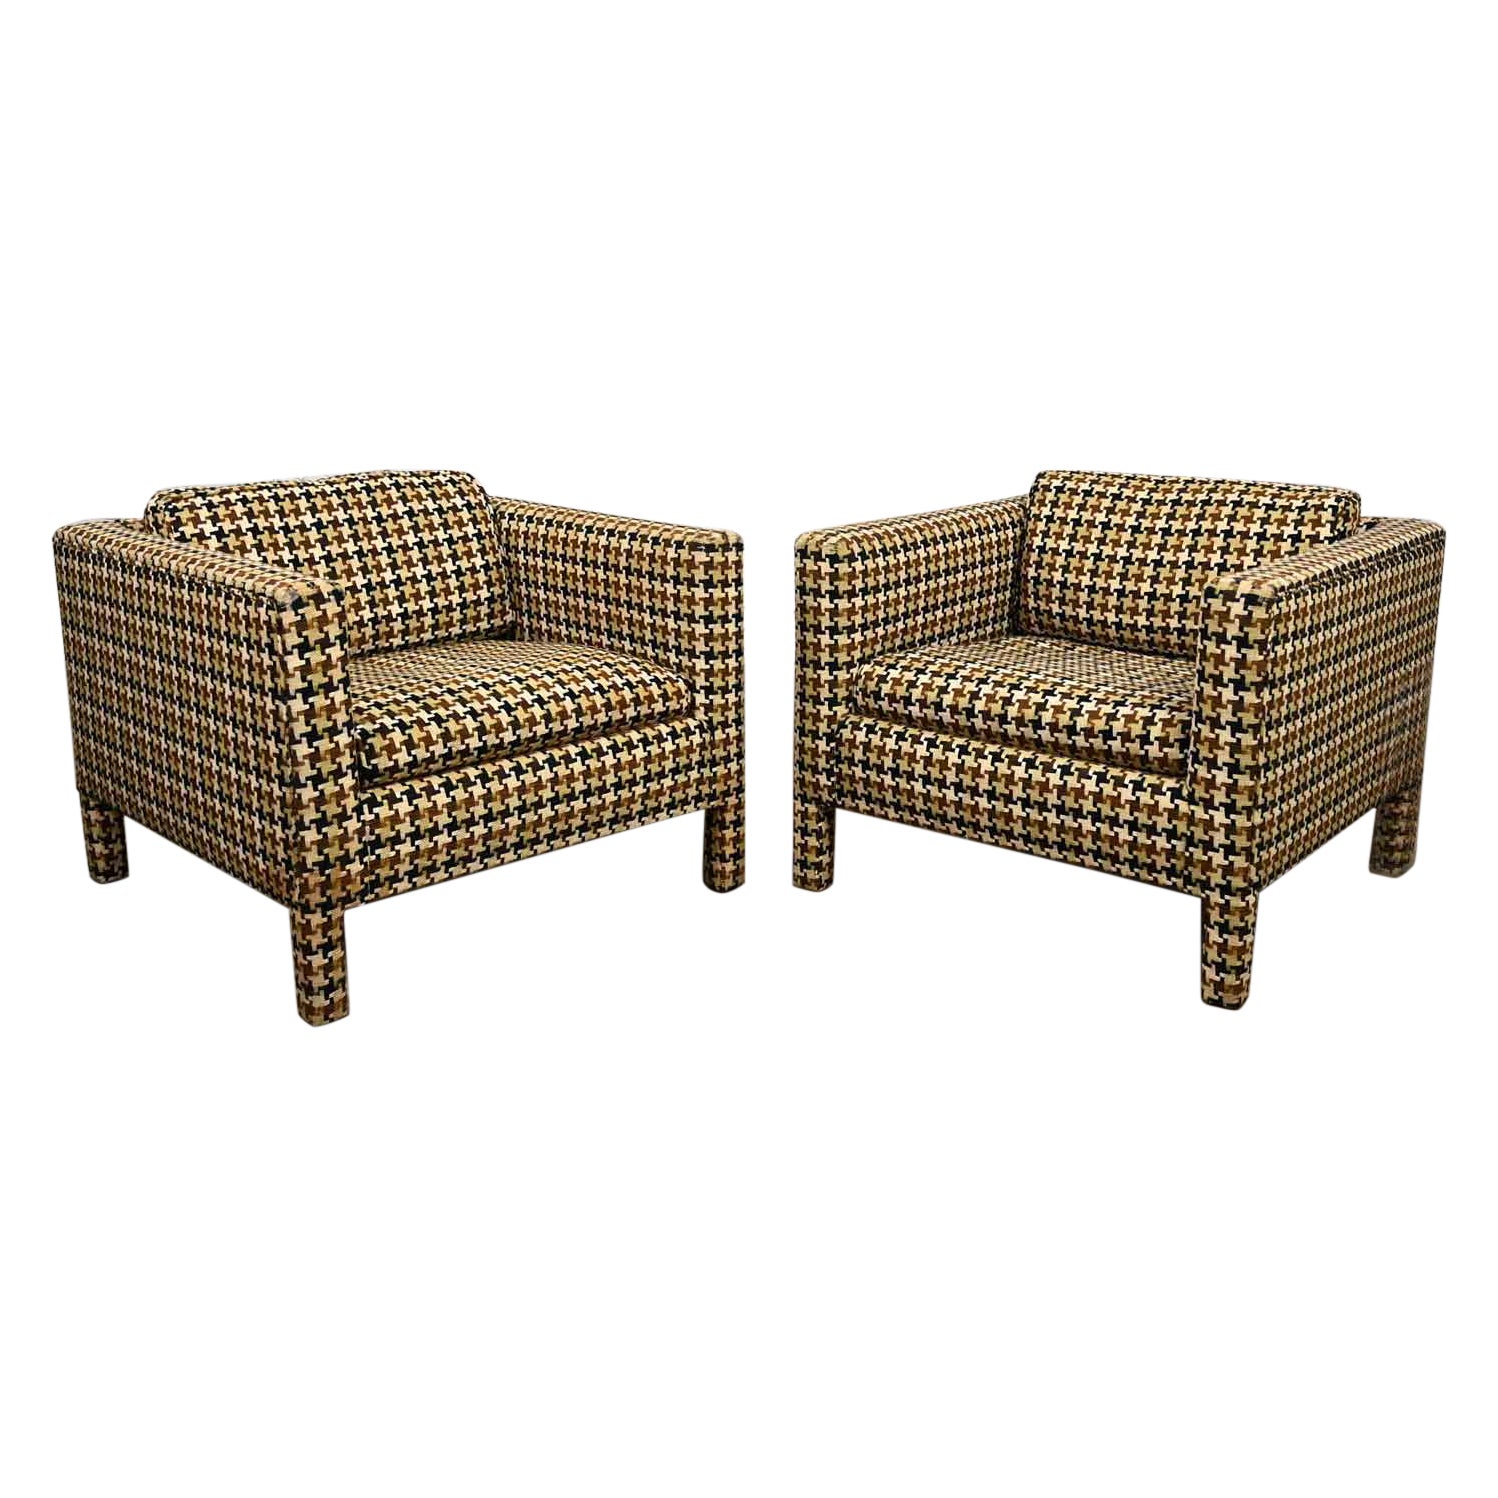 Pair Mid-Century Modern - Modern Parson’s Cube Club Chairs Houndstooth Fabric